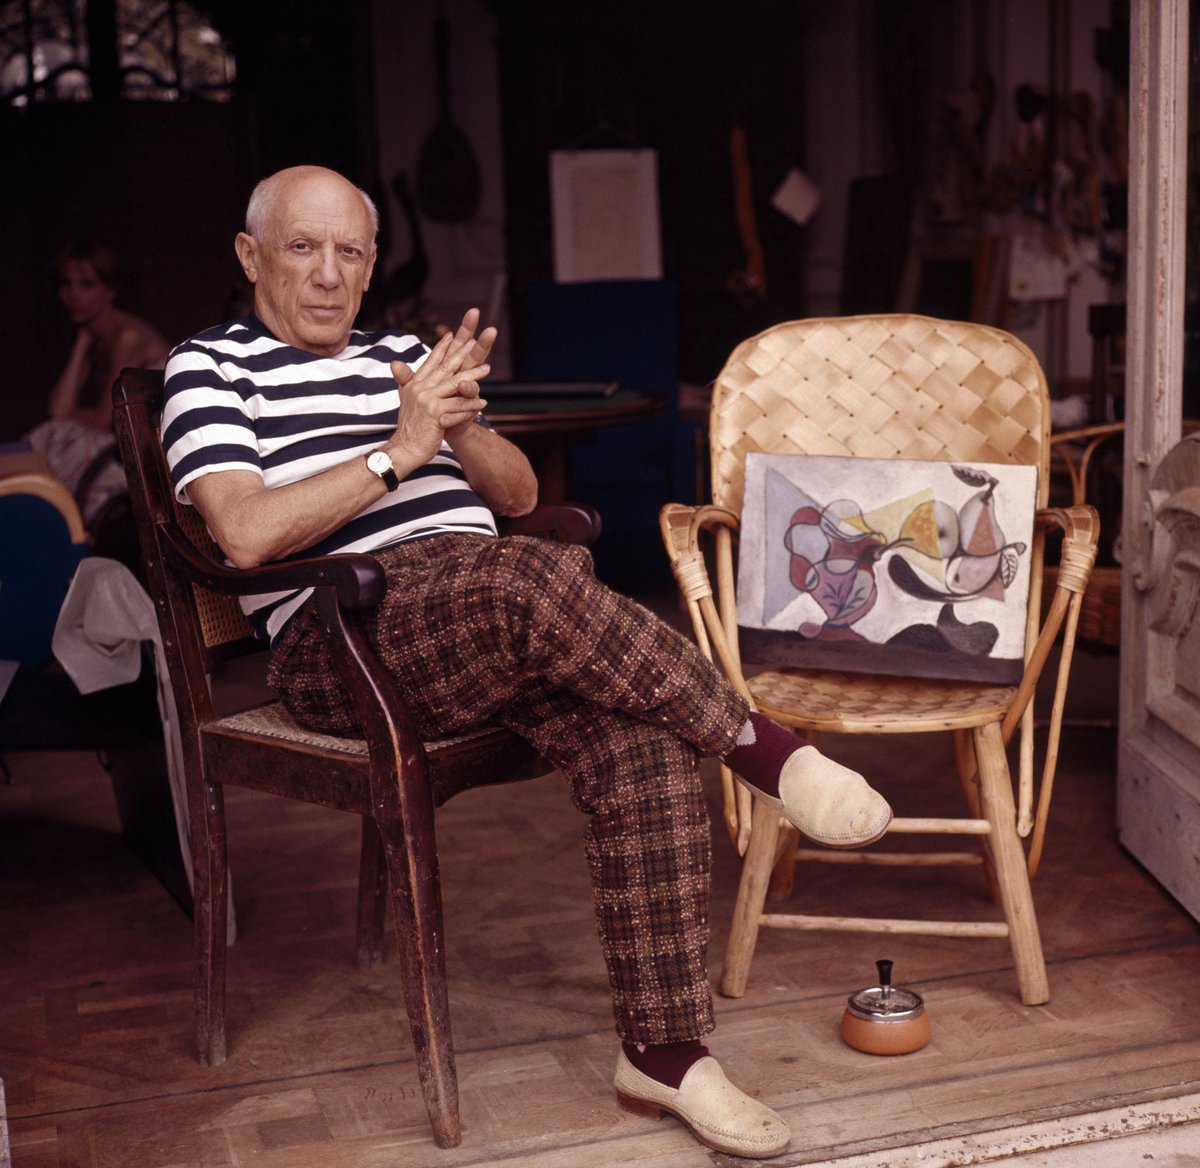 Spanish artist #PabloPicasso died #onthisday in 1973. 🎨 #painter #art #sculptor #printmaker #ceramicist #stagedesigner #poet #playwright #Cubism #Surrealism #Picasso #trivia